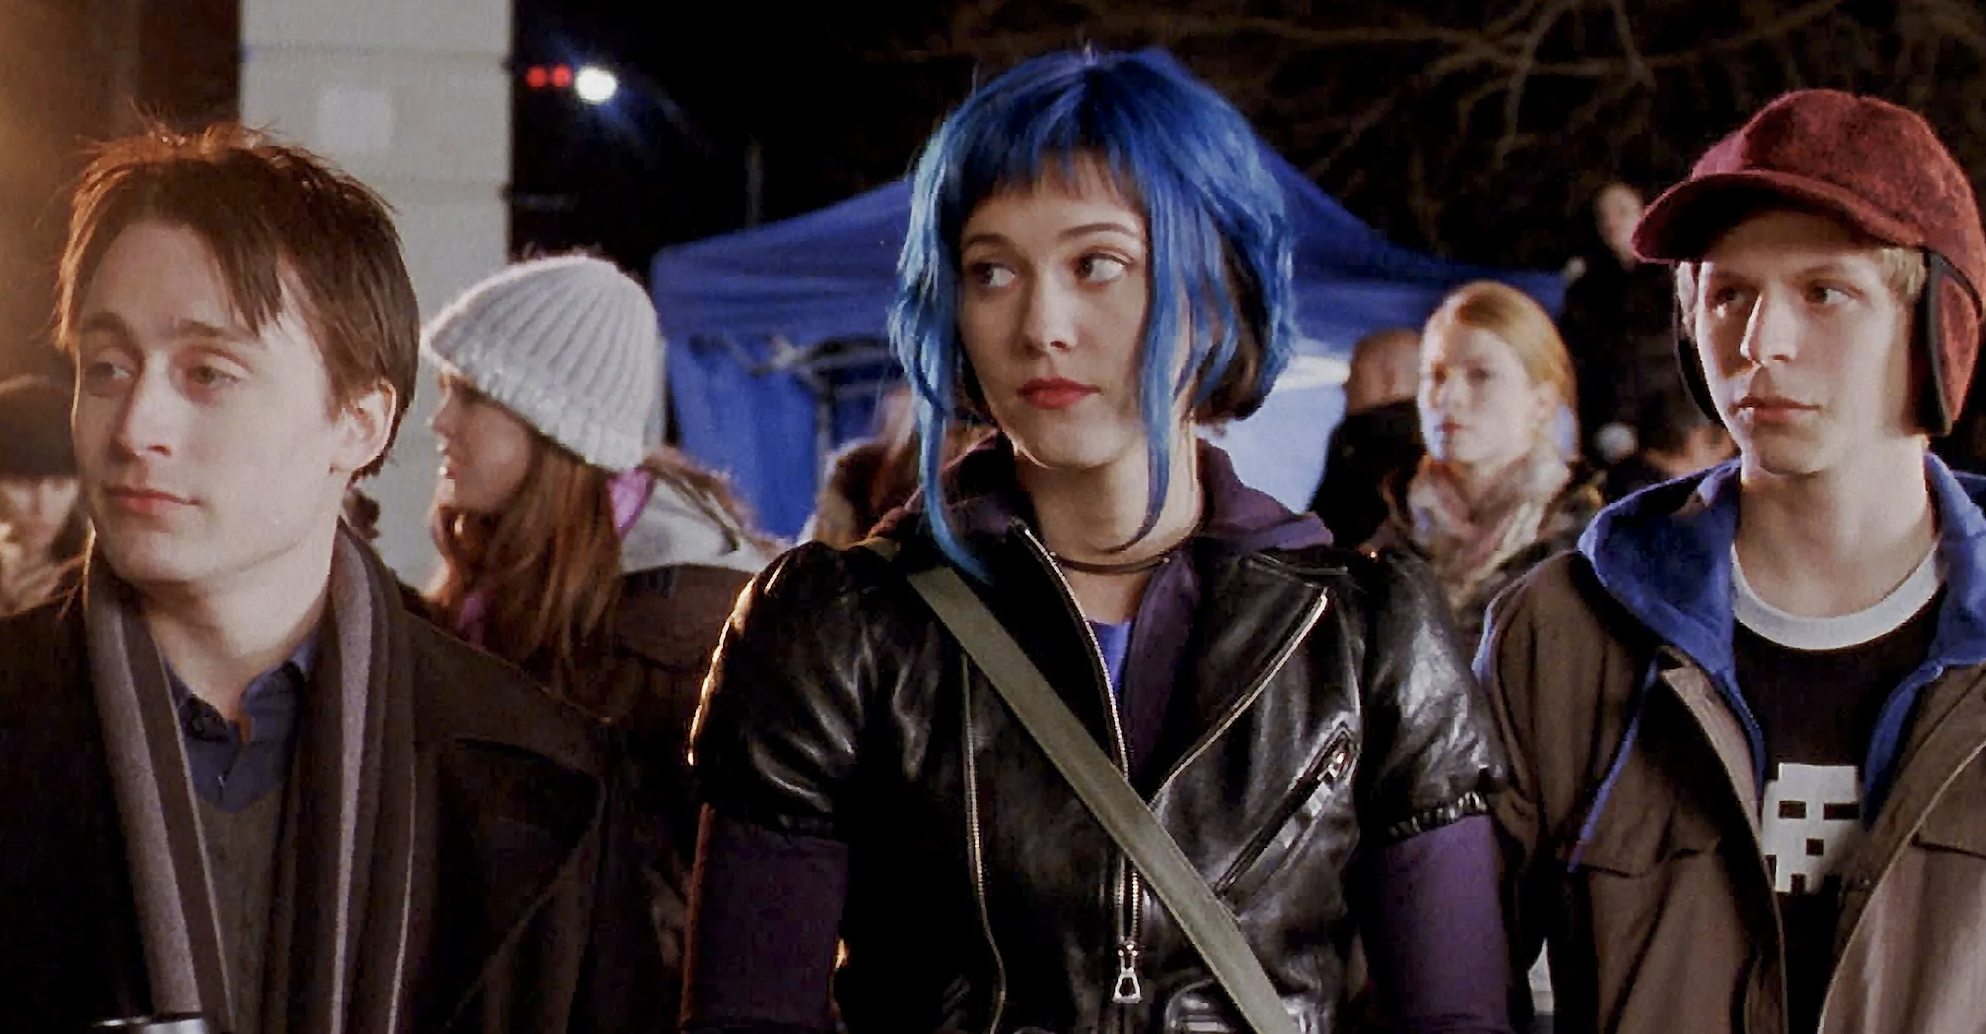 Three characters from the film &quot;Scott Pilgrim vs. the World&quot; standing together, middle character with blue hair